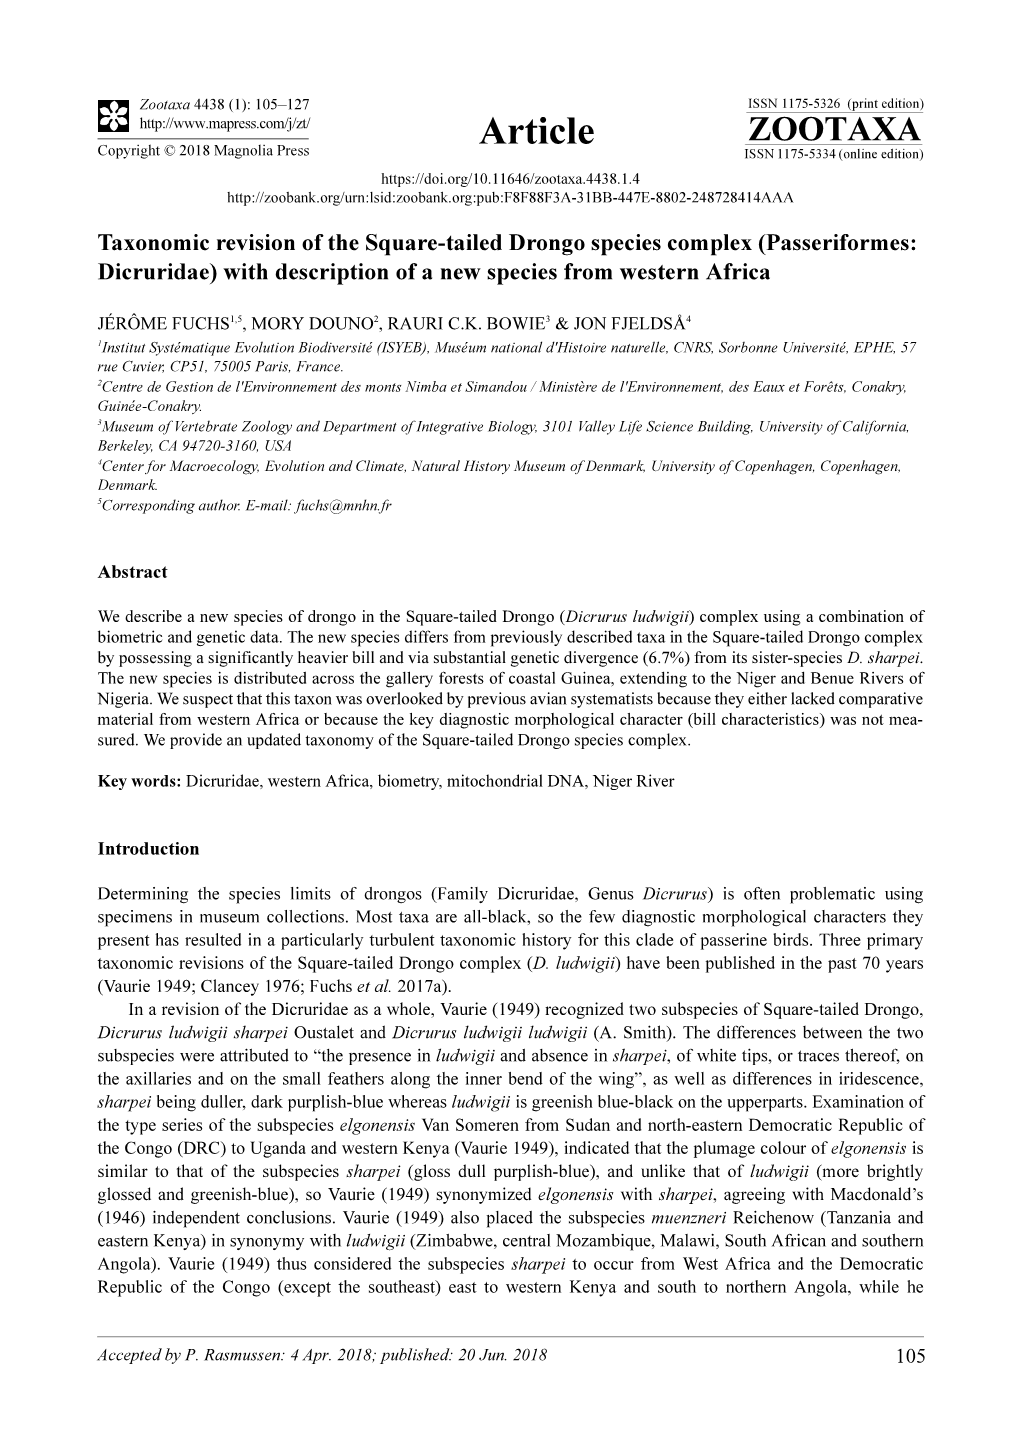 Taxonomic Revision of the Square-Tailed Drongo Species Complex (Passeriformes: Dicruridae) with Description of a New Species from Western Africa